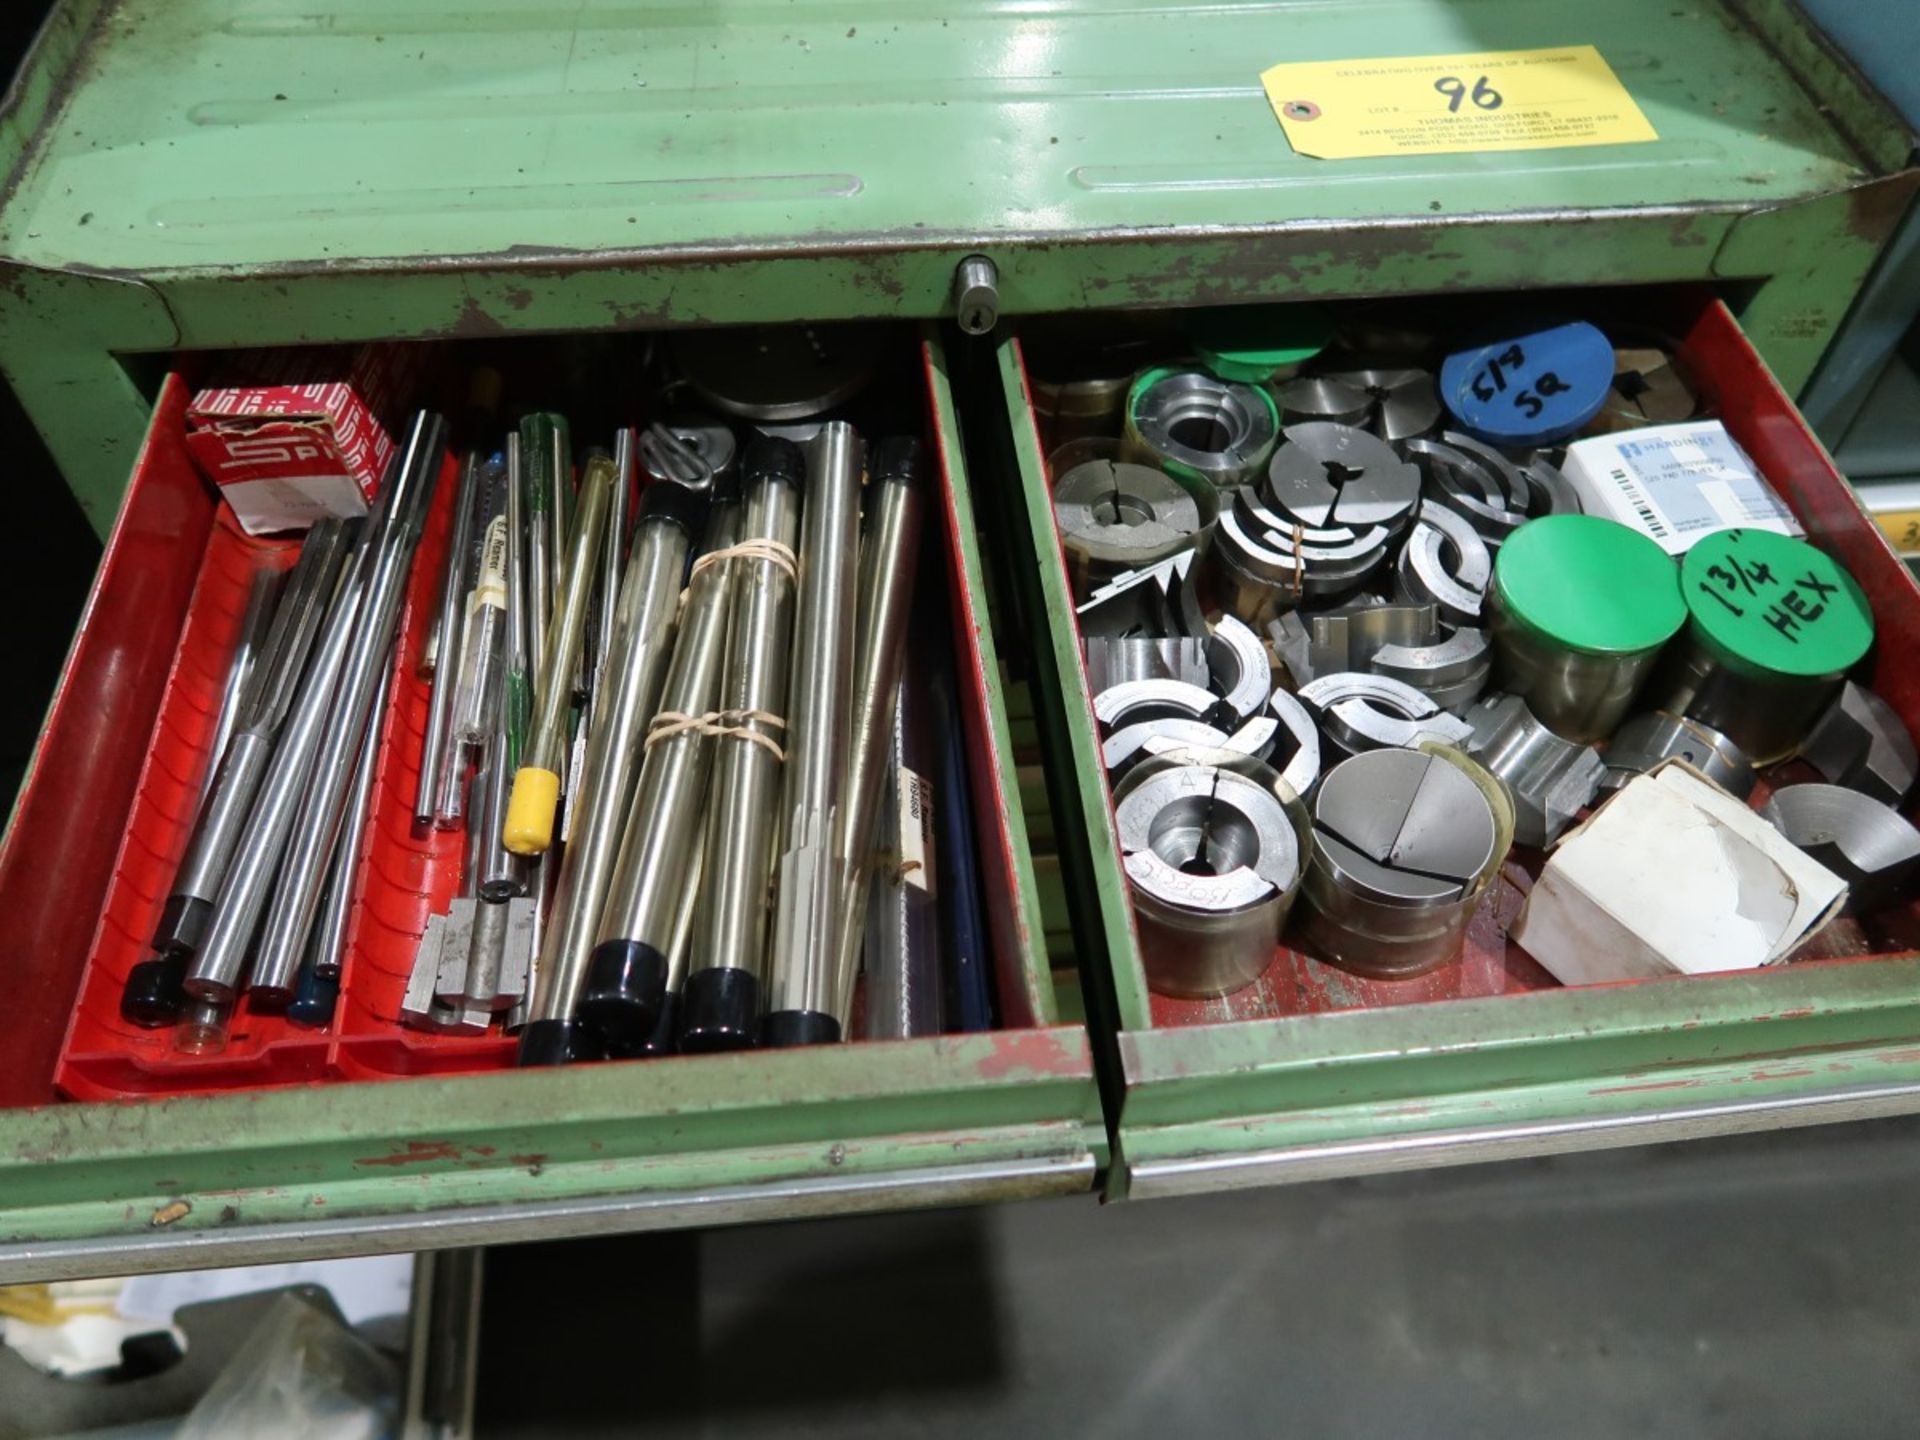 9-DRAWER LISTA LIKE CABINET W/ CONTENTS INCLUDING: DRILLS, REAMERS, TAPS, COLLET PADS, BORING - Image 2 of 8